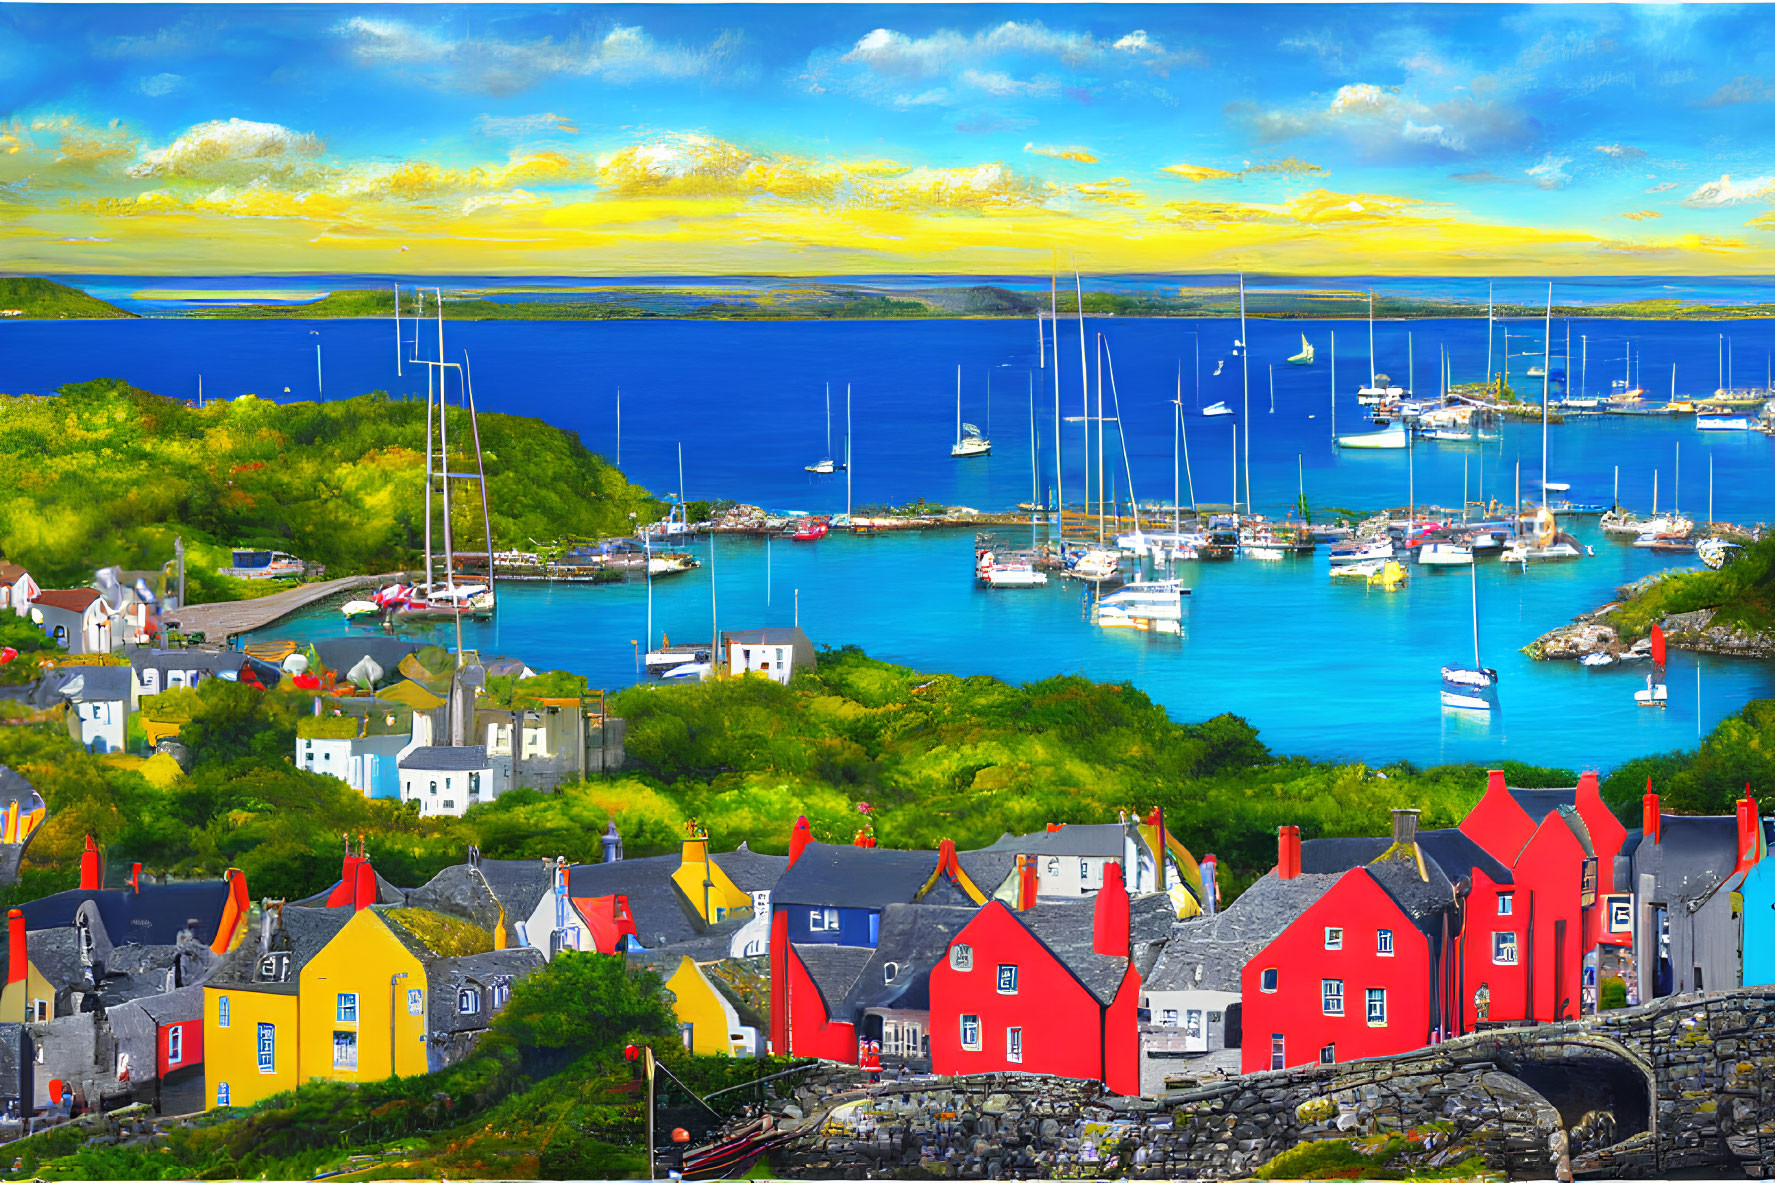 Scenic coastal village with colorful houses and sailboats